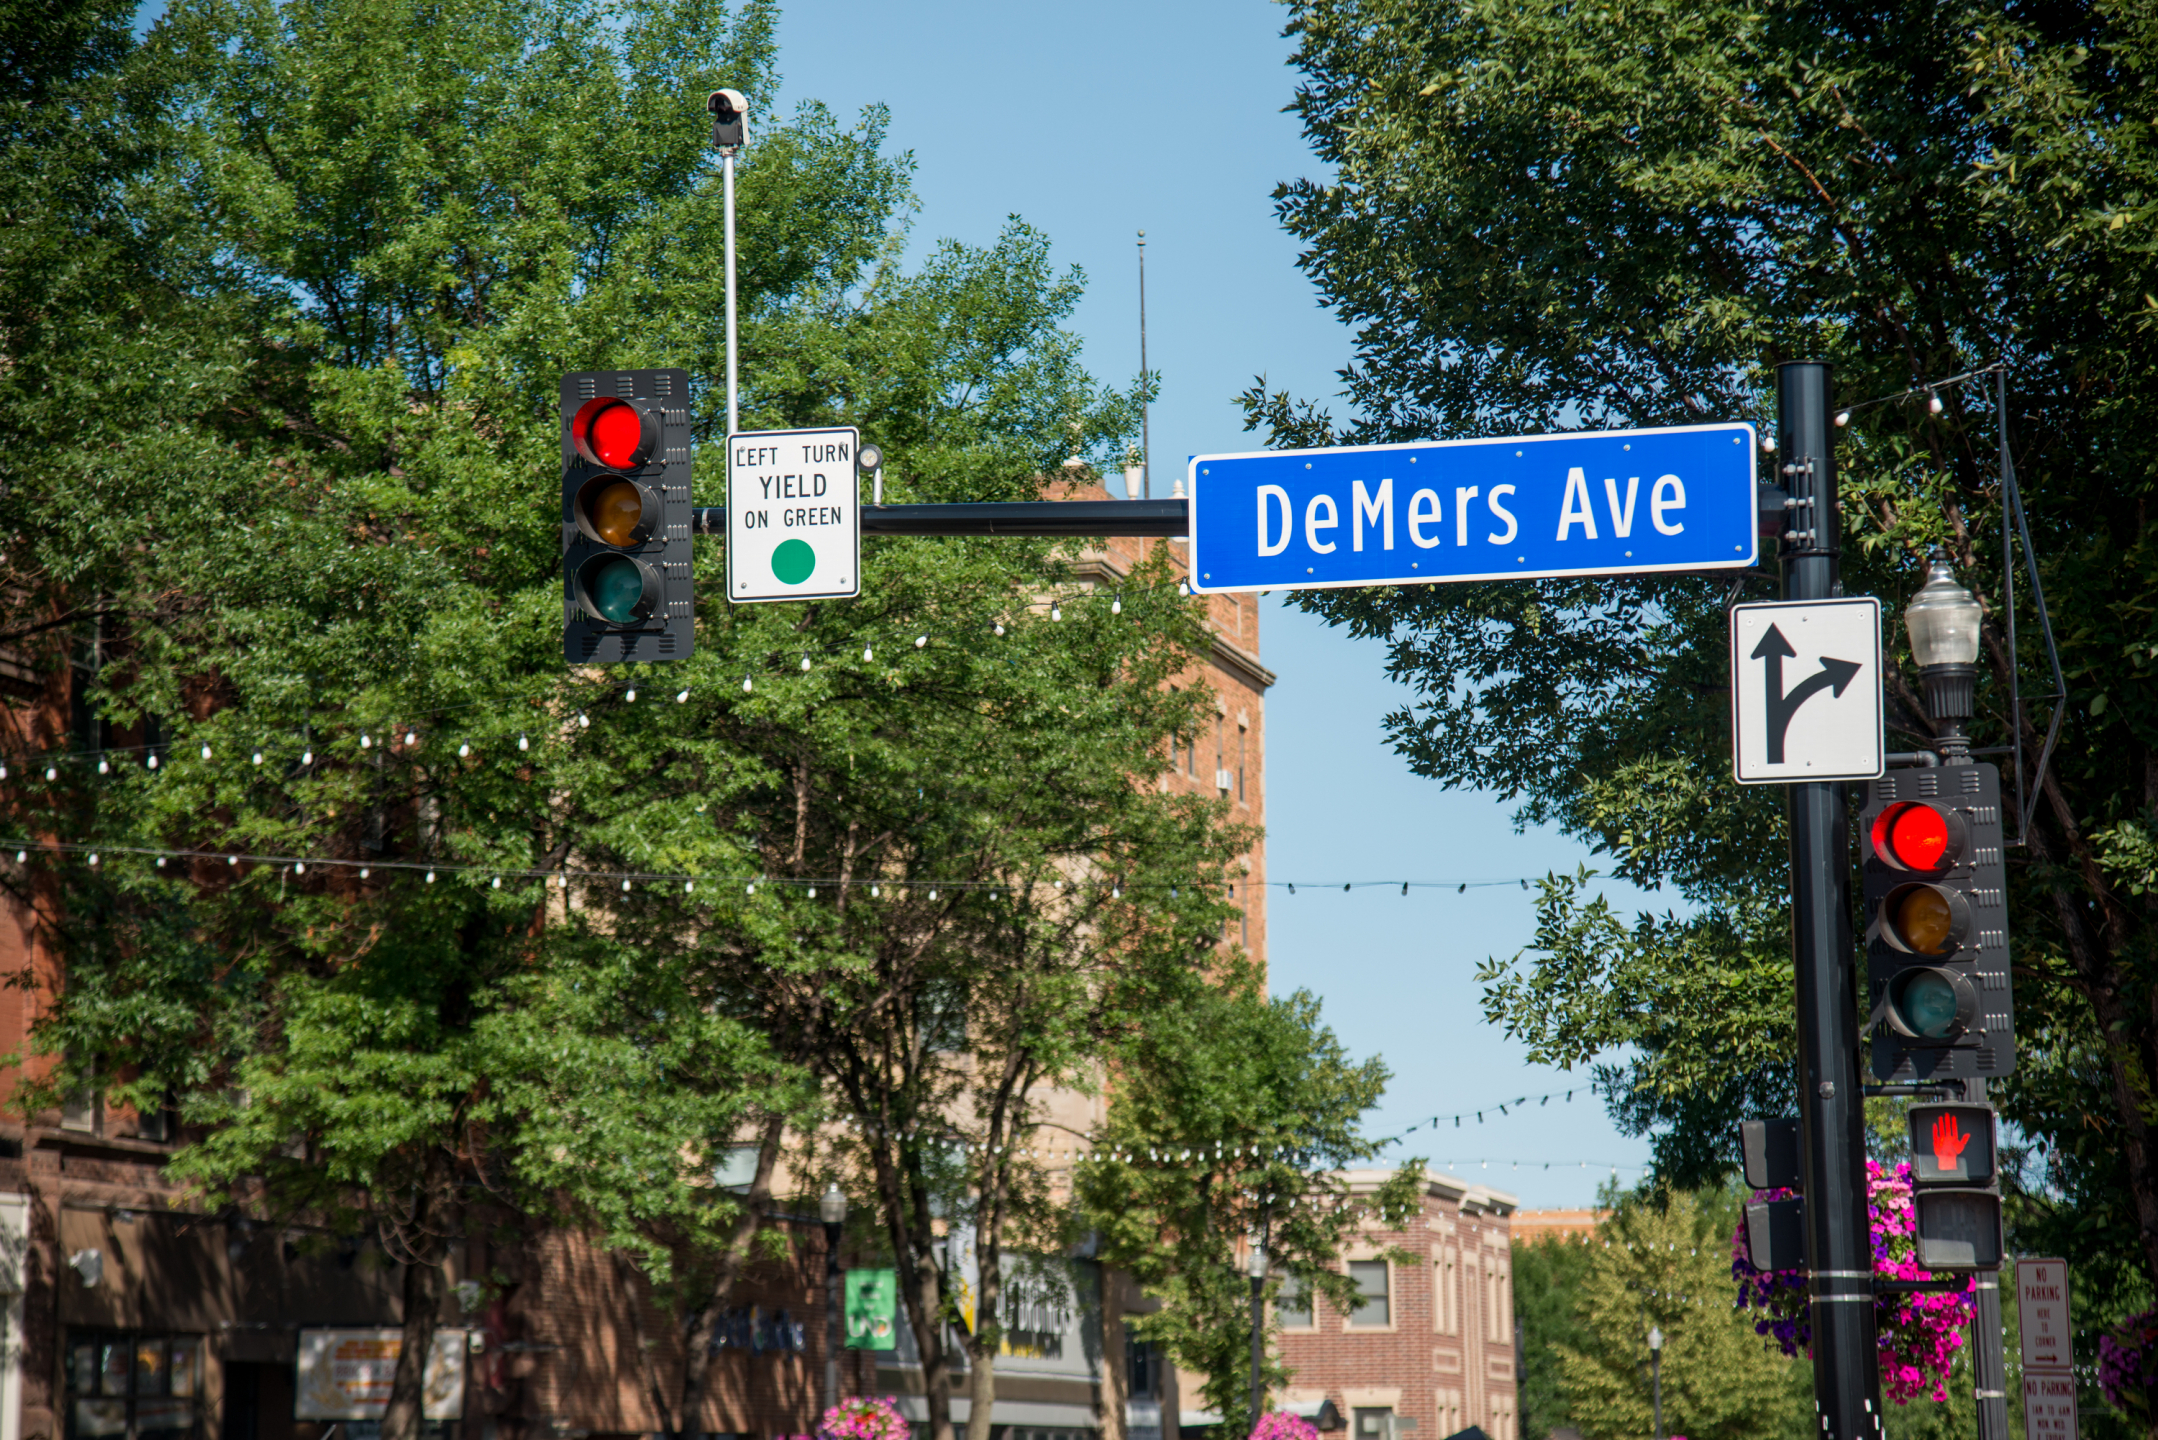 Image of DeMers Avenue sign on traffic light poles with trees and buildings in the background